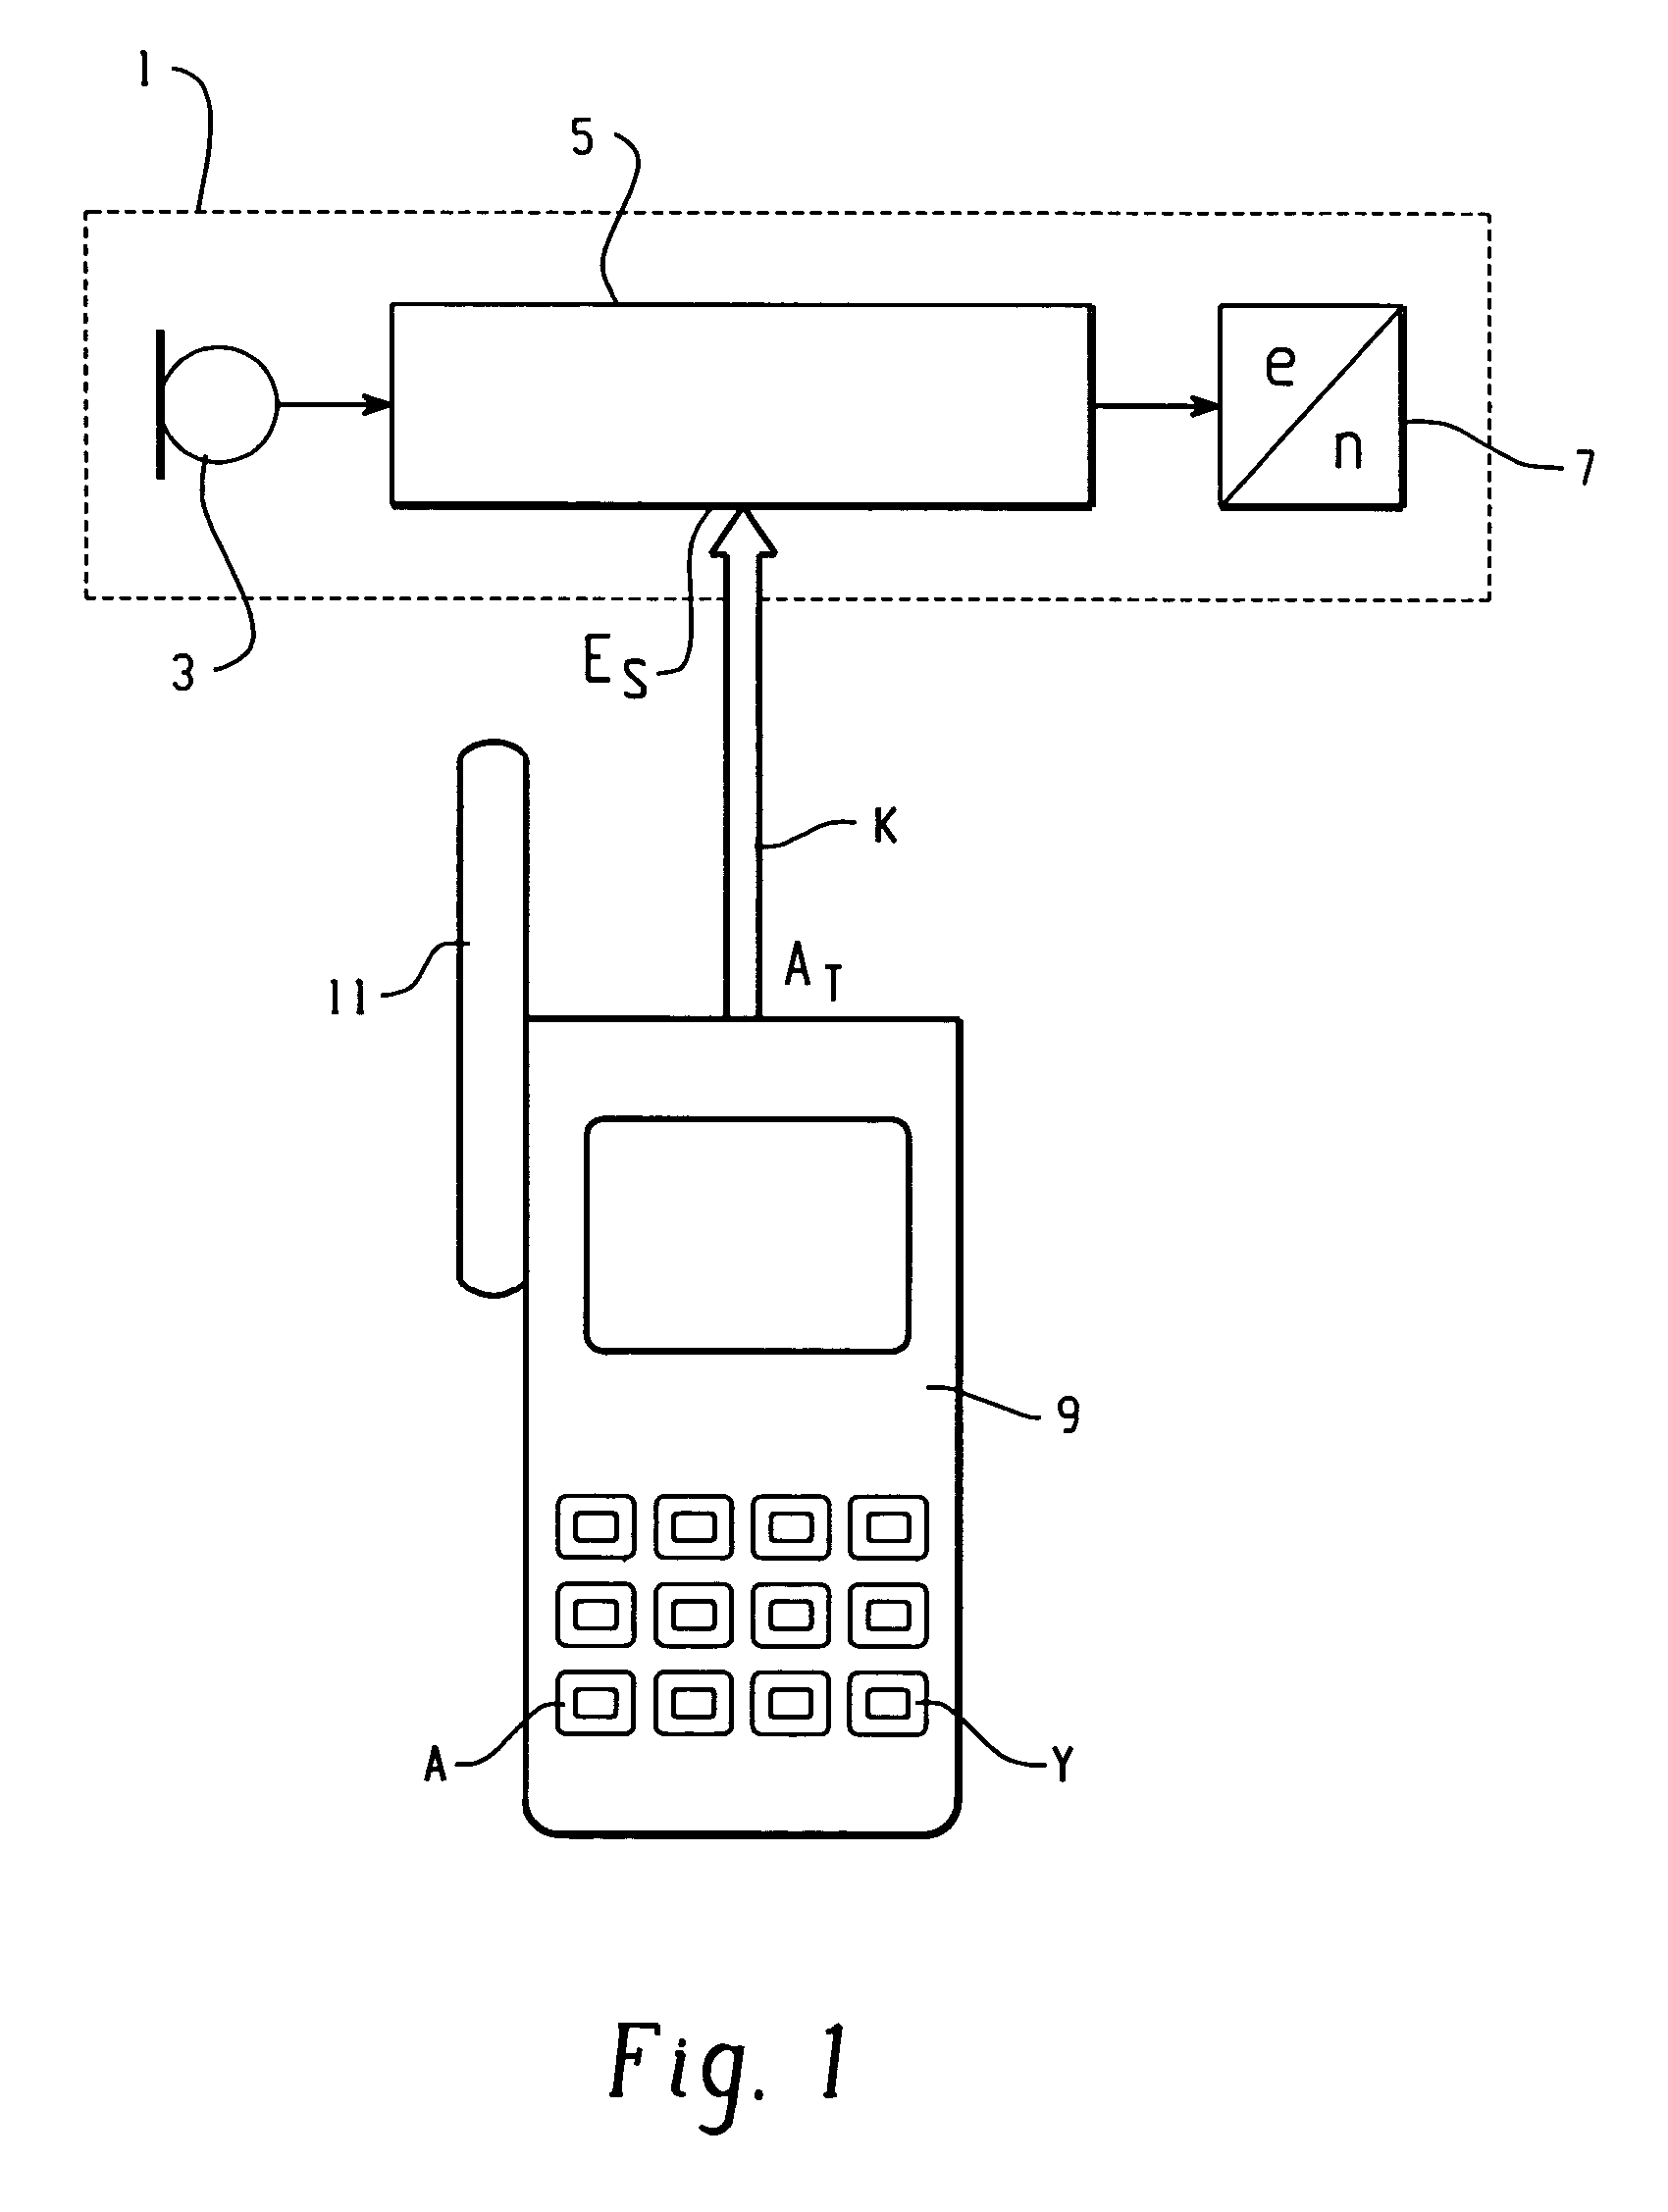 Fitting-setup for hearing device